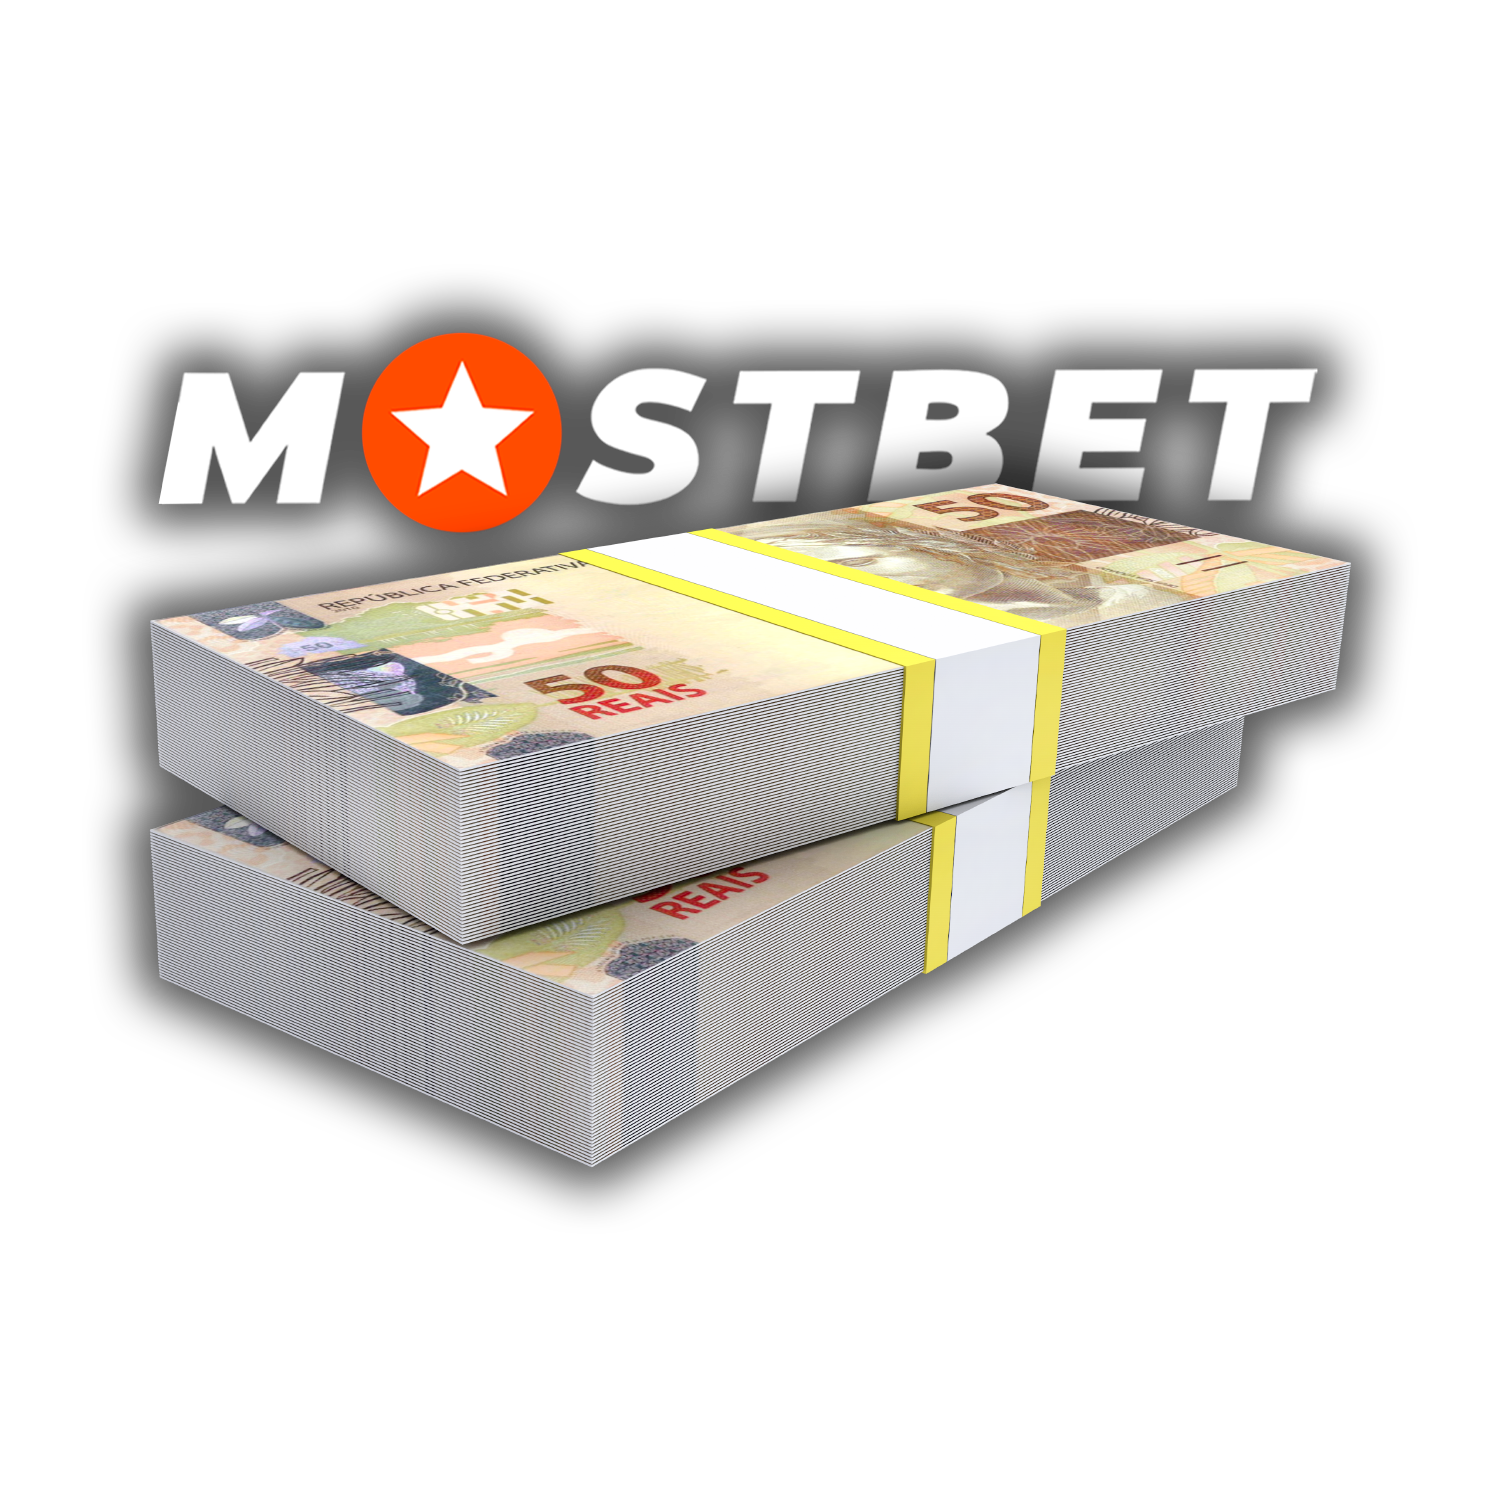 The Most Effective Ideas In Mostbet provides a comprehensive and enjoyable betting and gaming experience. With its extensive range of games, user-friendly platform, and commitment to security and fairness, Mostbet stands as a top choice for online betting and gaming enthusiasts.